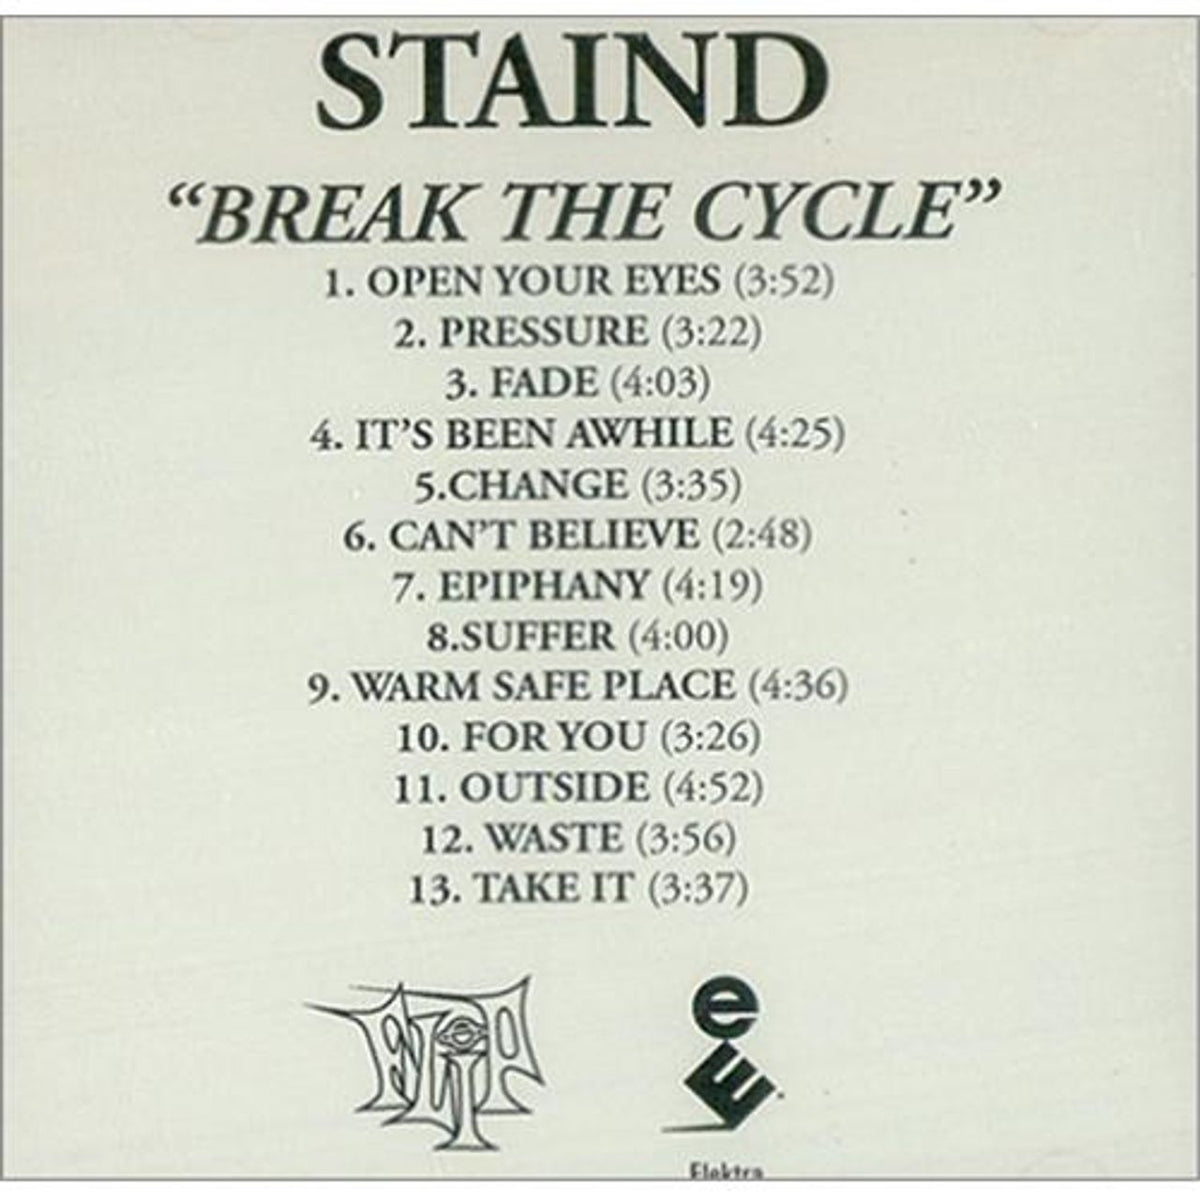 Male absolutte Der er behov for Staind Break The Cycle US Promo CD-R acetate — RareVinyl.com